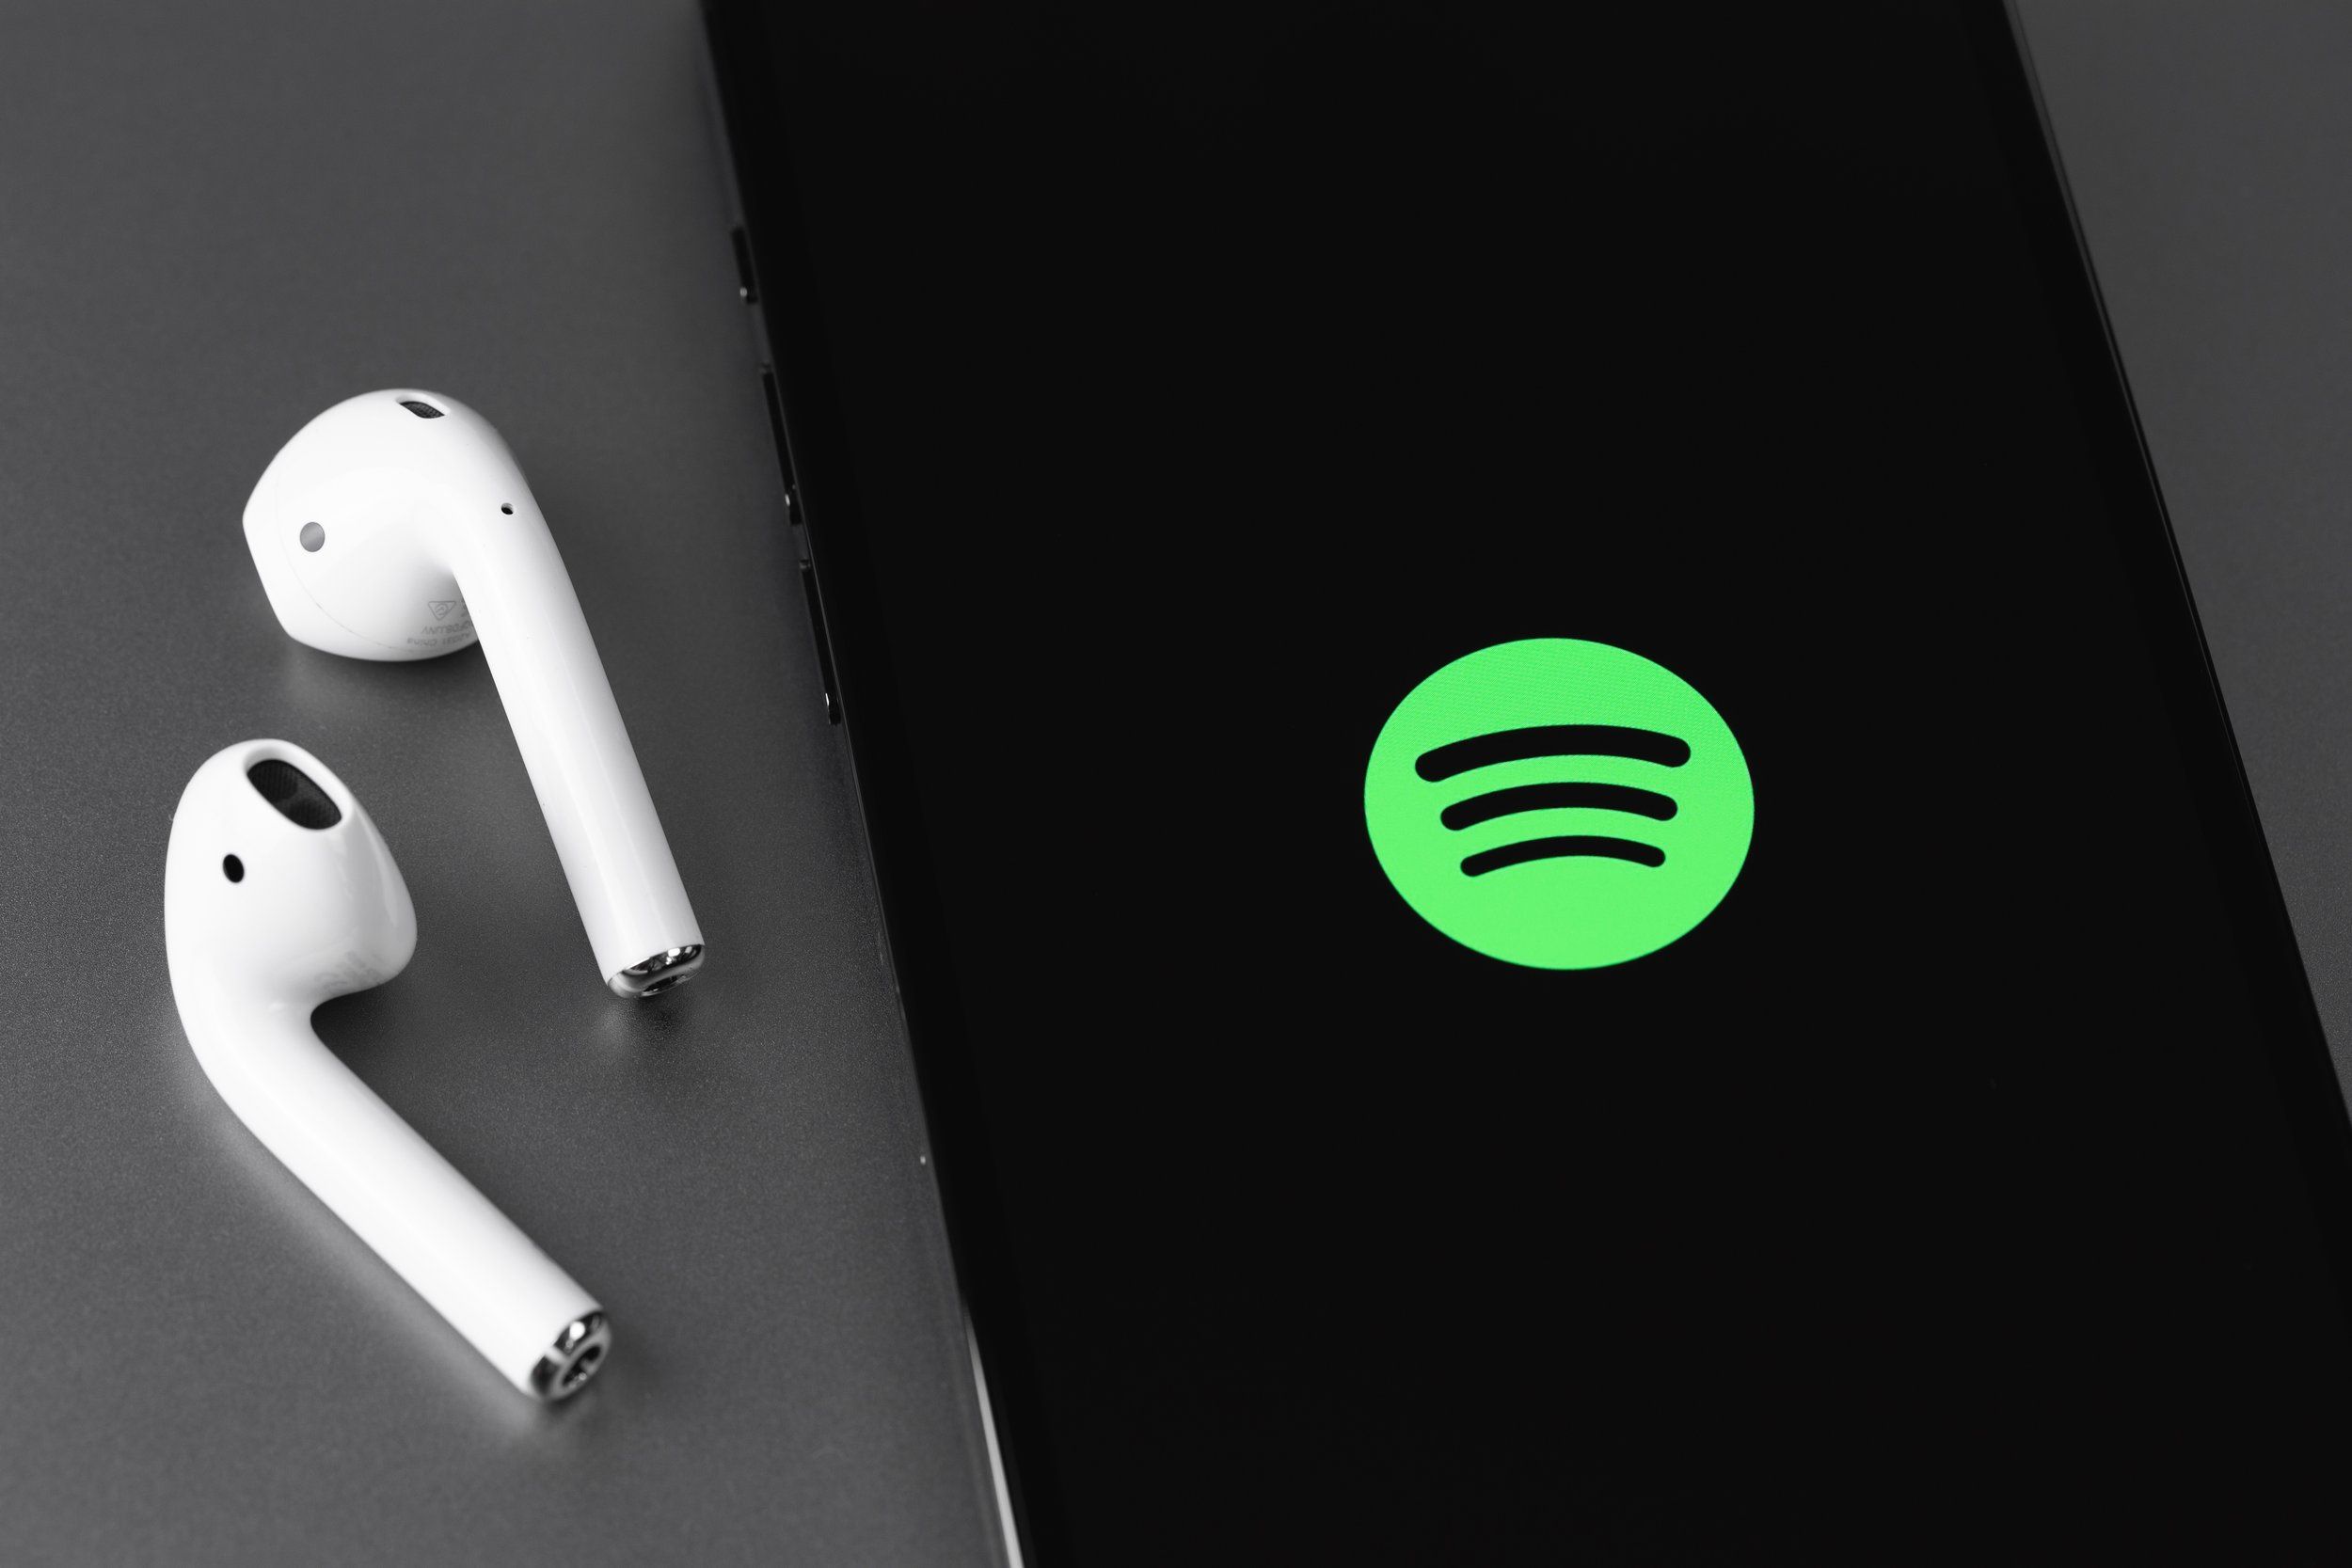 Spotify Began Its Music Streaming Service In Which Country?